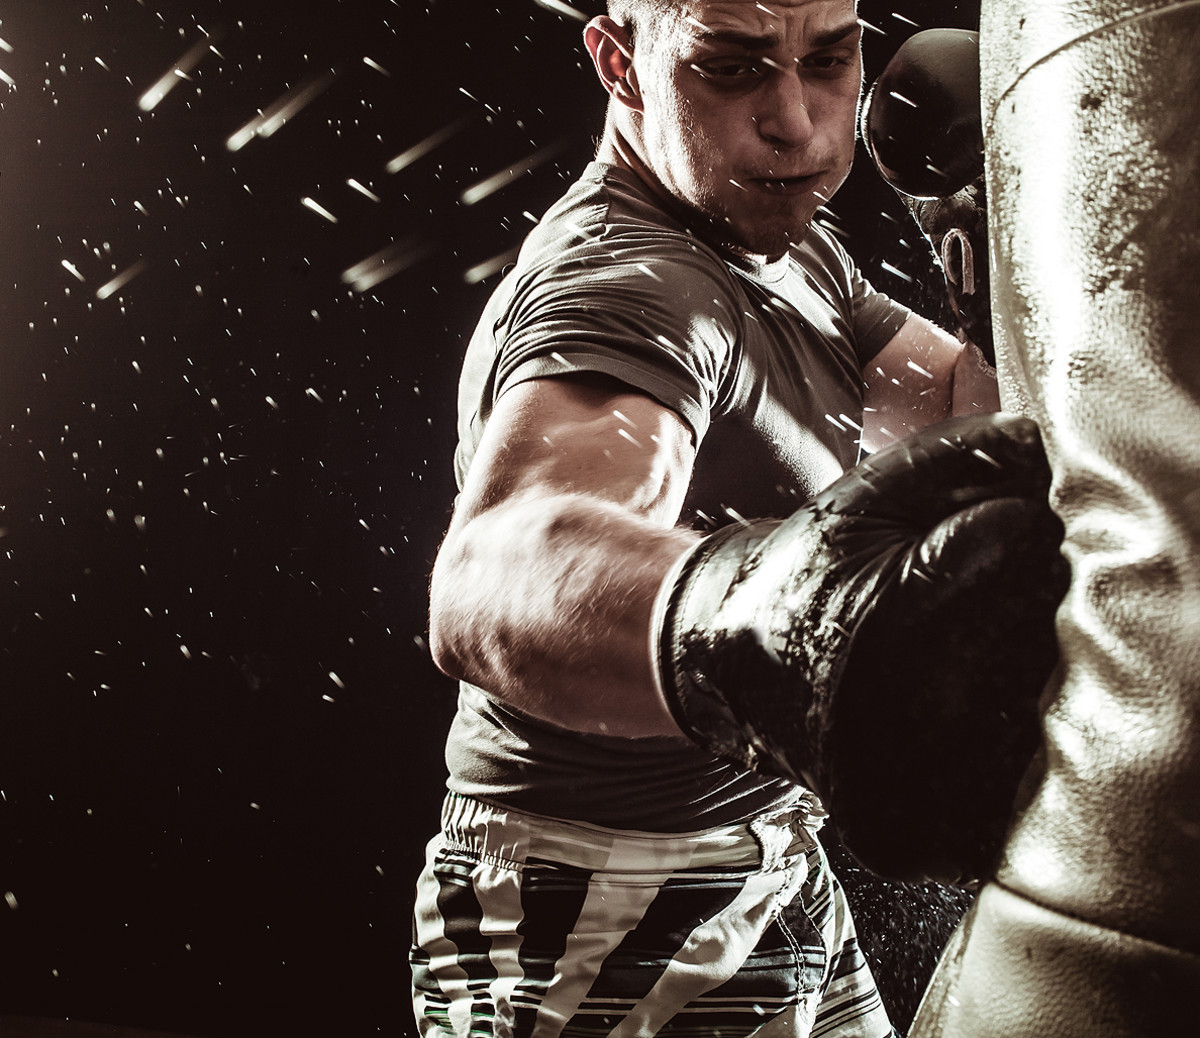 5 Boxing Workout Routines to Get in Lean Fighting Shape